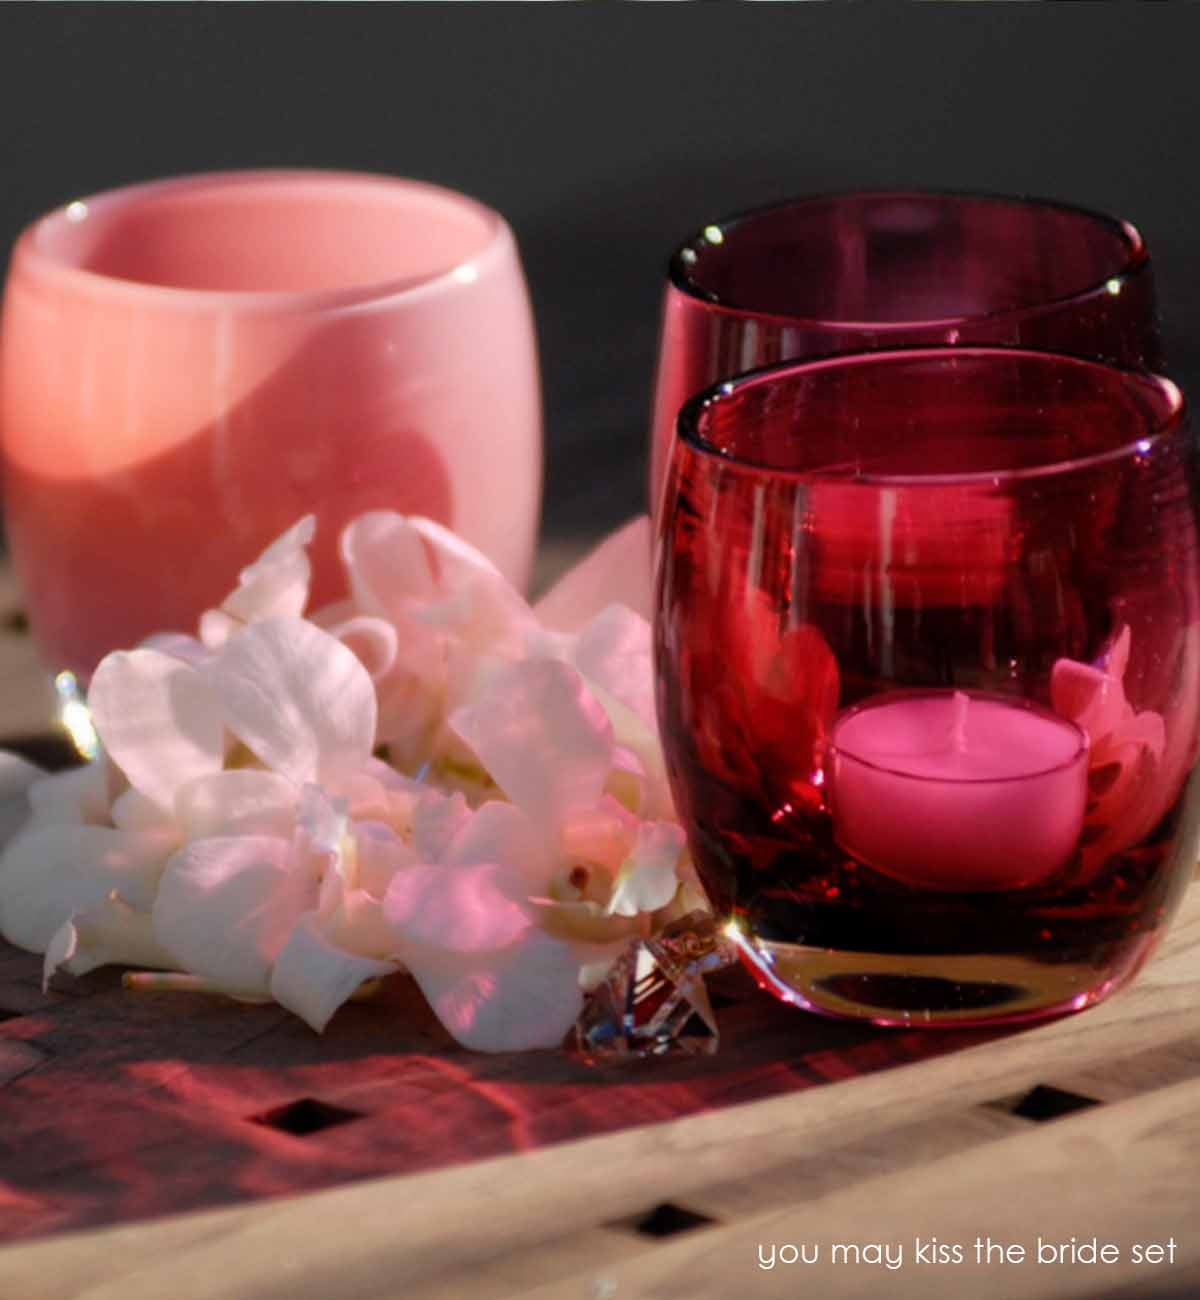 you may kiss the bride set, smooch pink and true love translucent dark pink, hand-blown glass votive candle holders